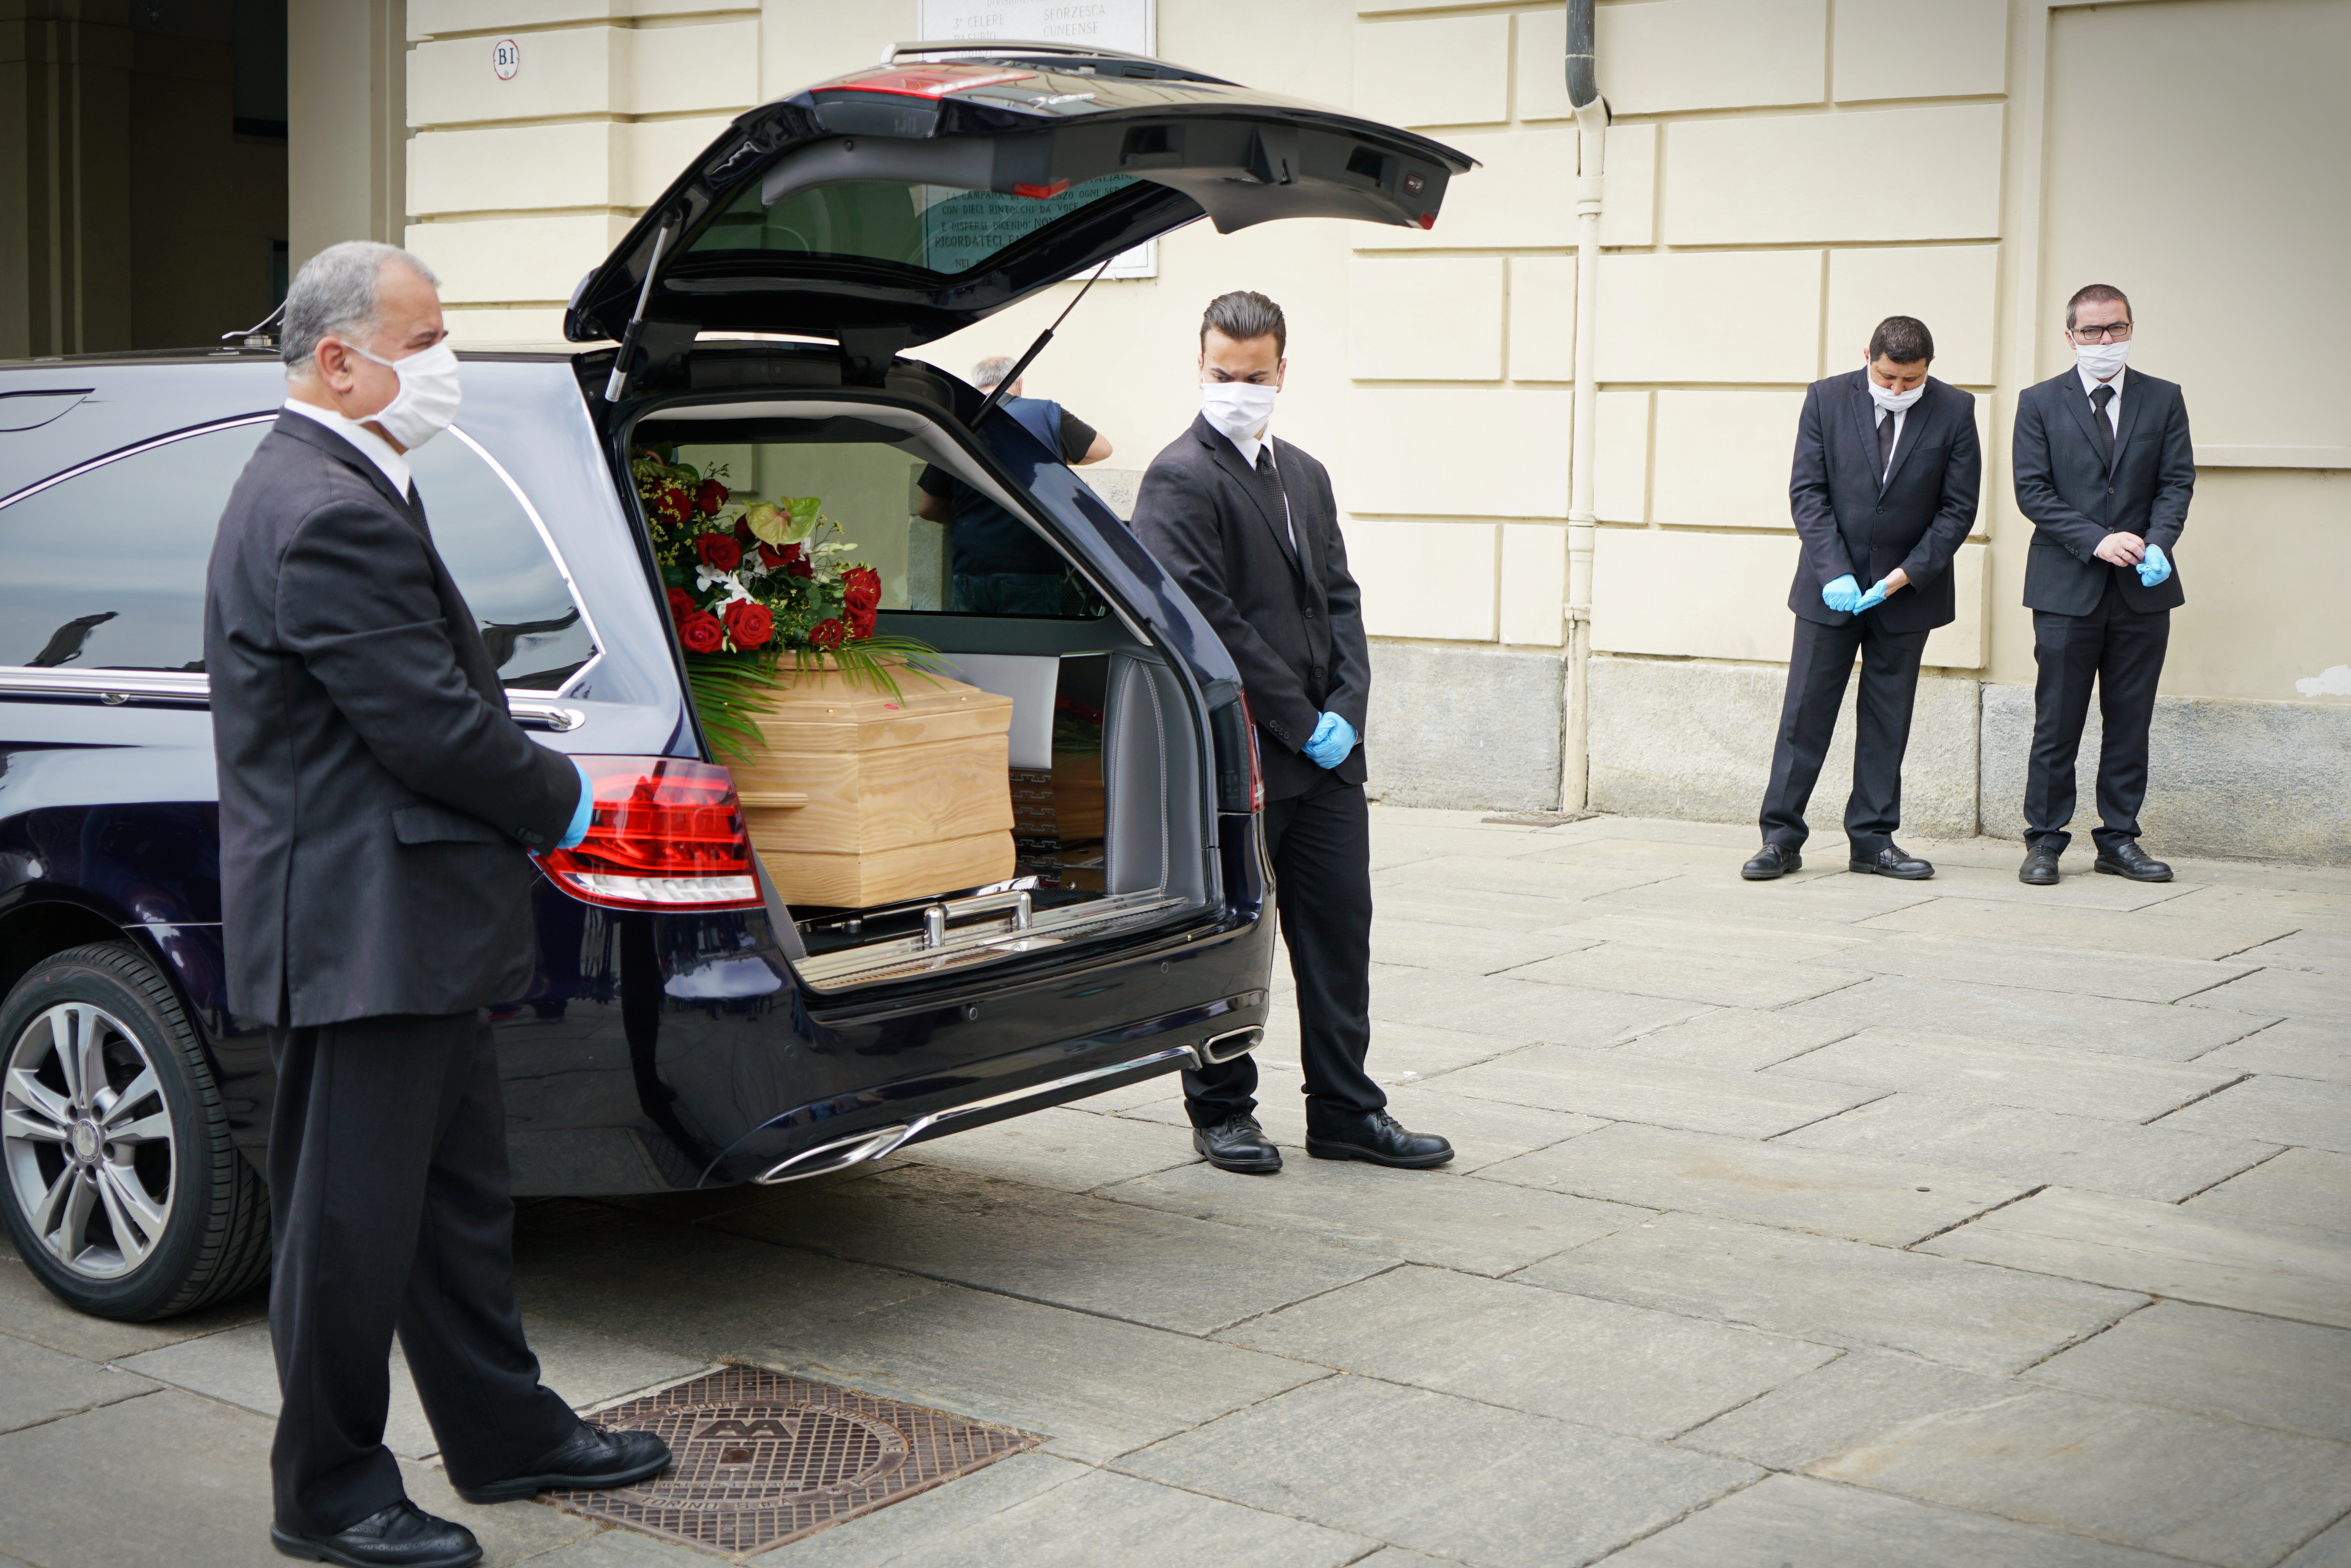 People gathered outside a hearse carrying a coffin | Source: Shutterstock